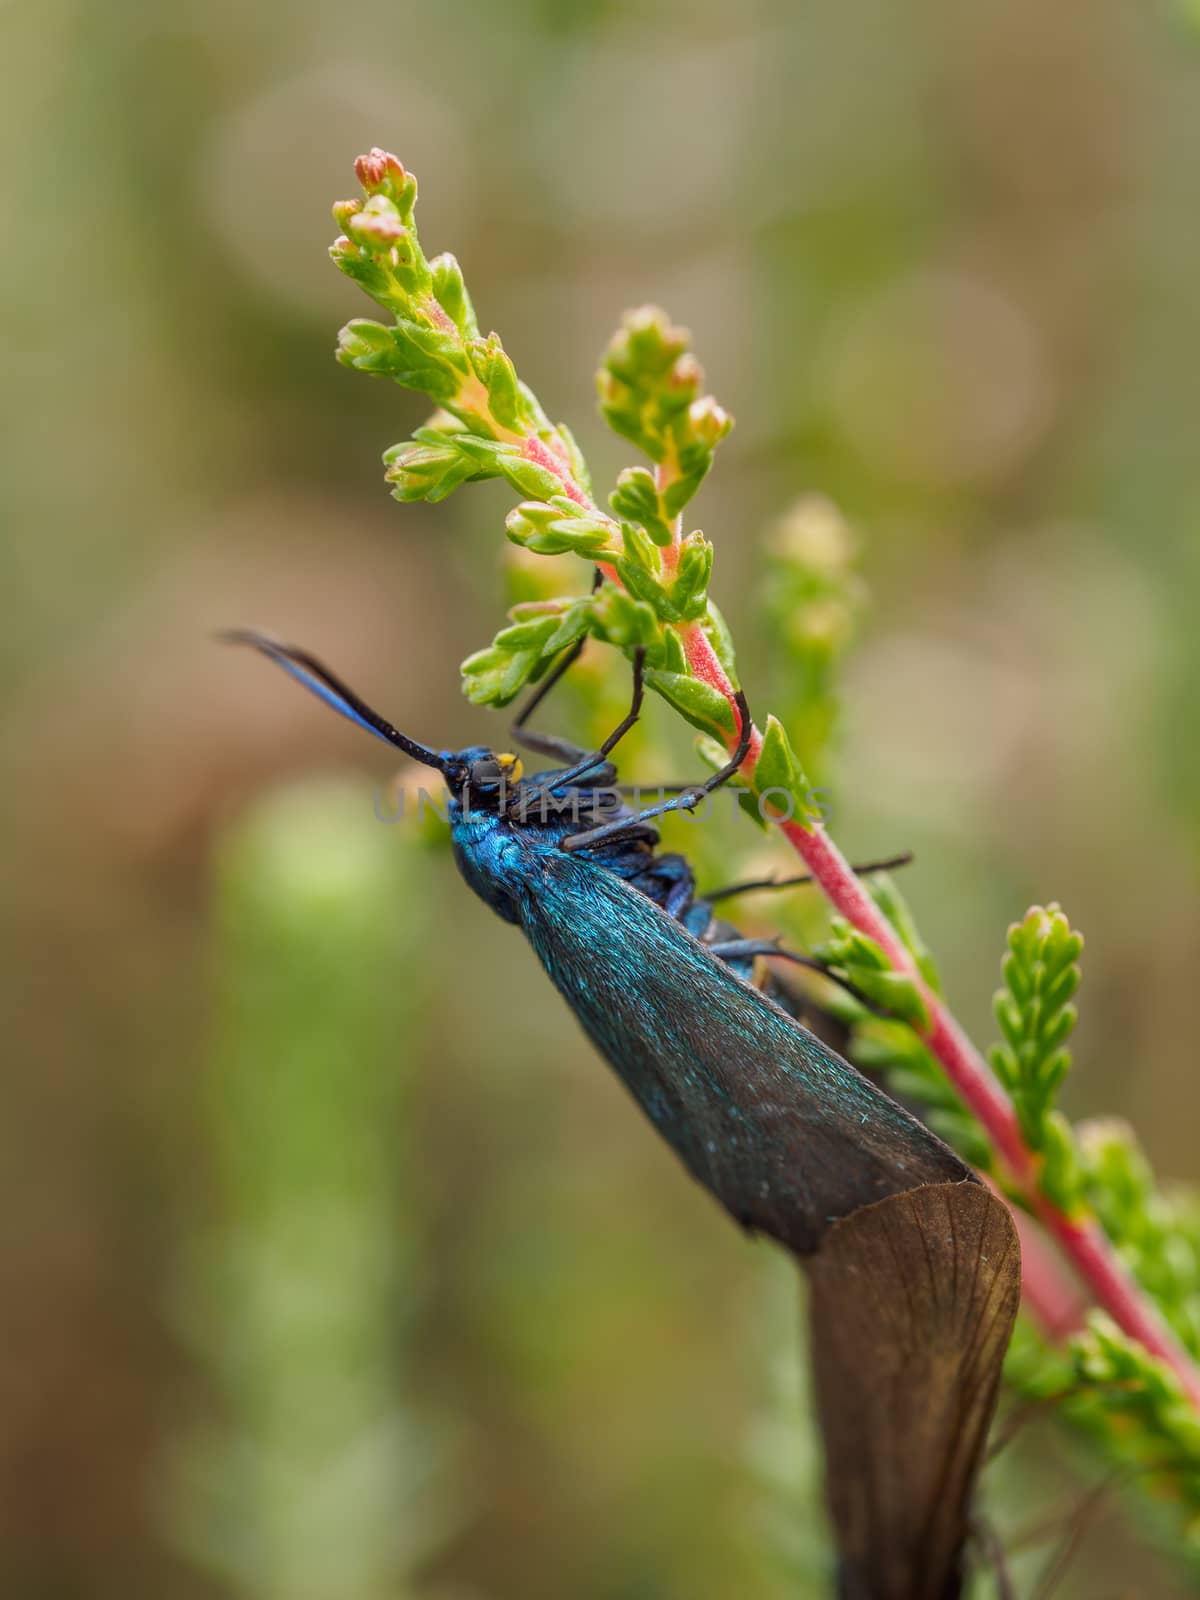 Blue insect with antennas by frankhoekzema